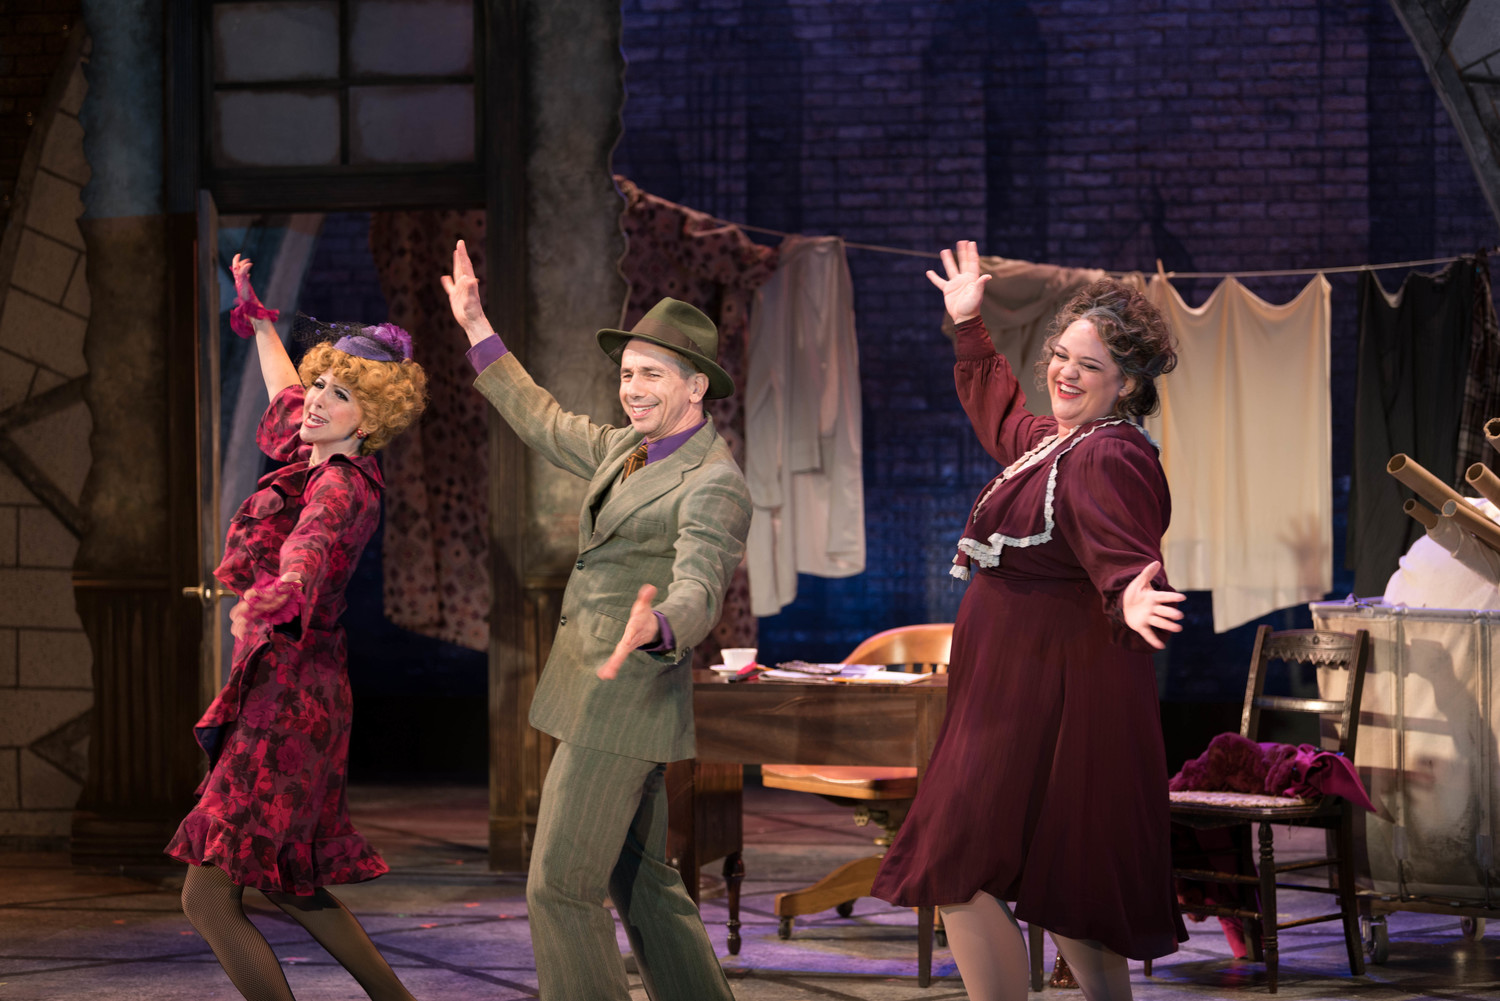 Gino Milo (Lily St. Regis), from left, Jon Peterson (Rooster) and Lynn Andrews (Miss Hannigan) in a scene from “Annie."